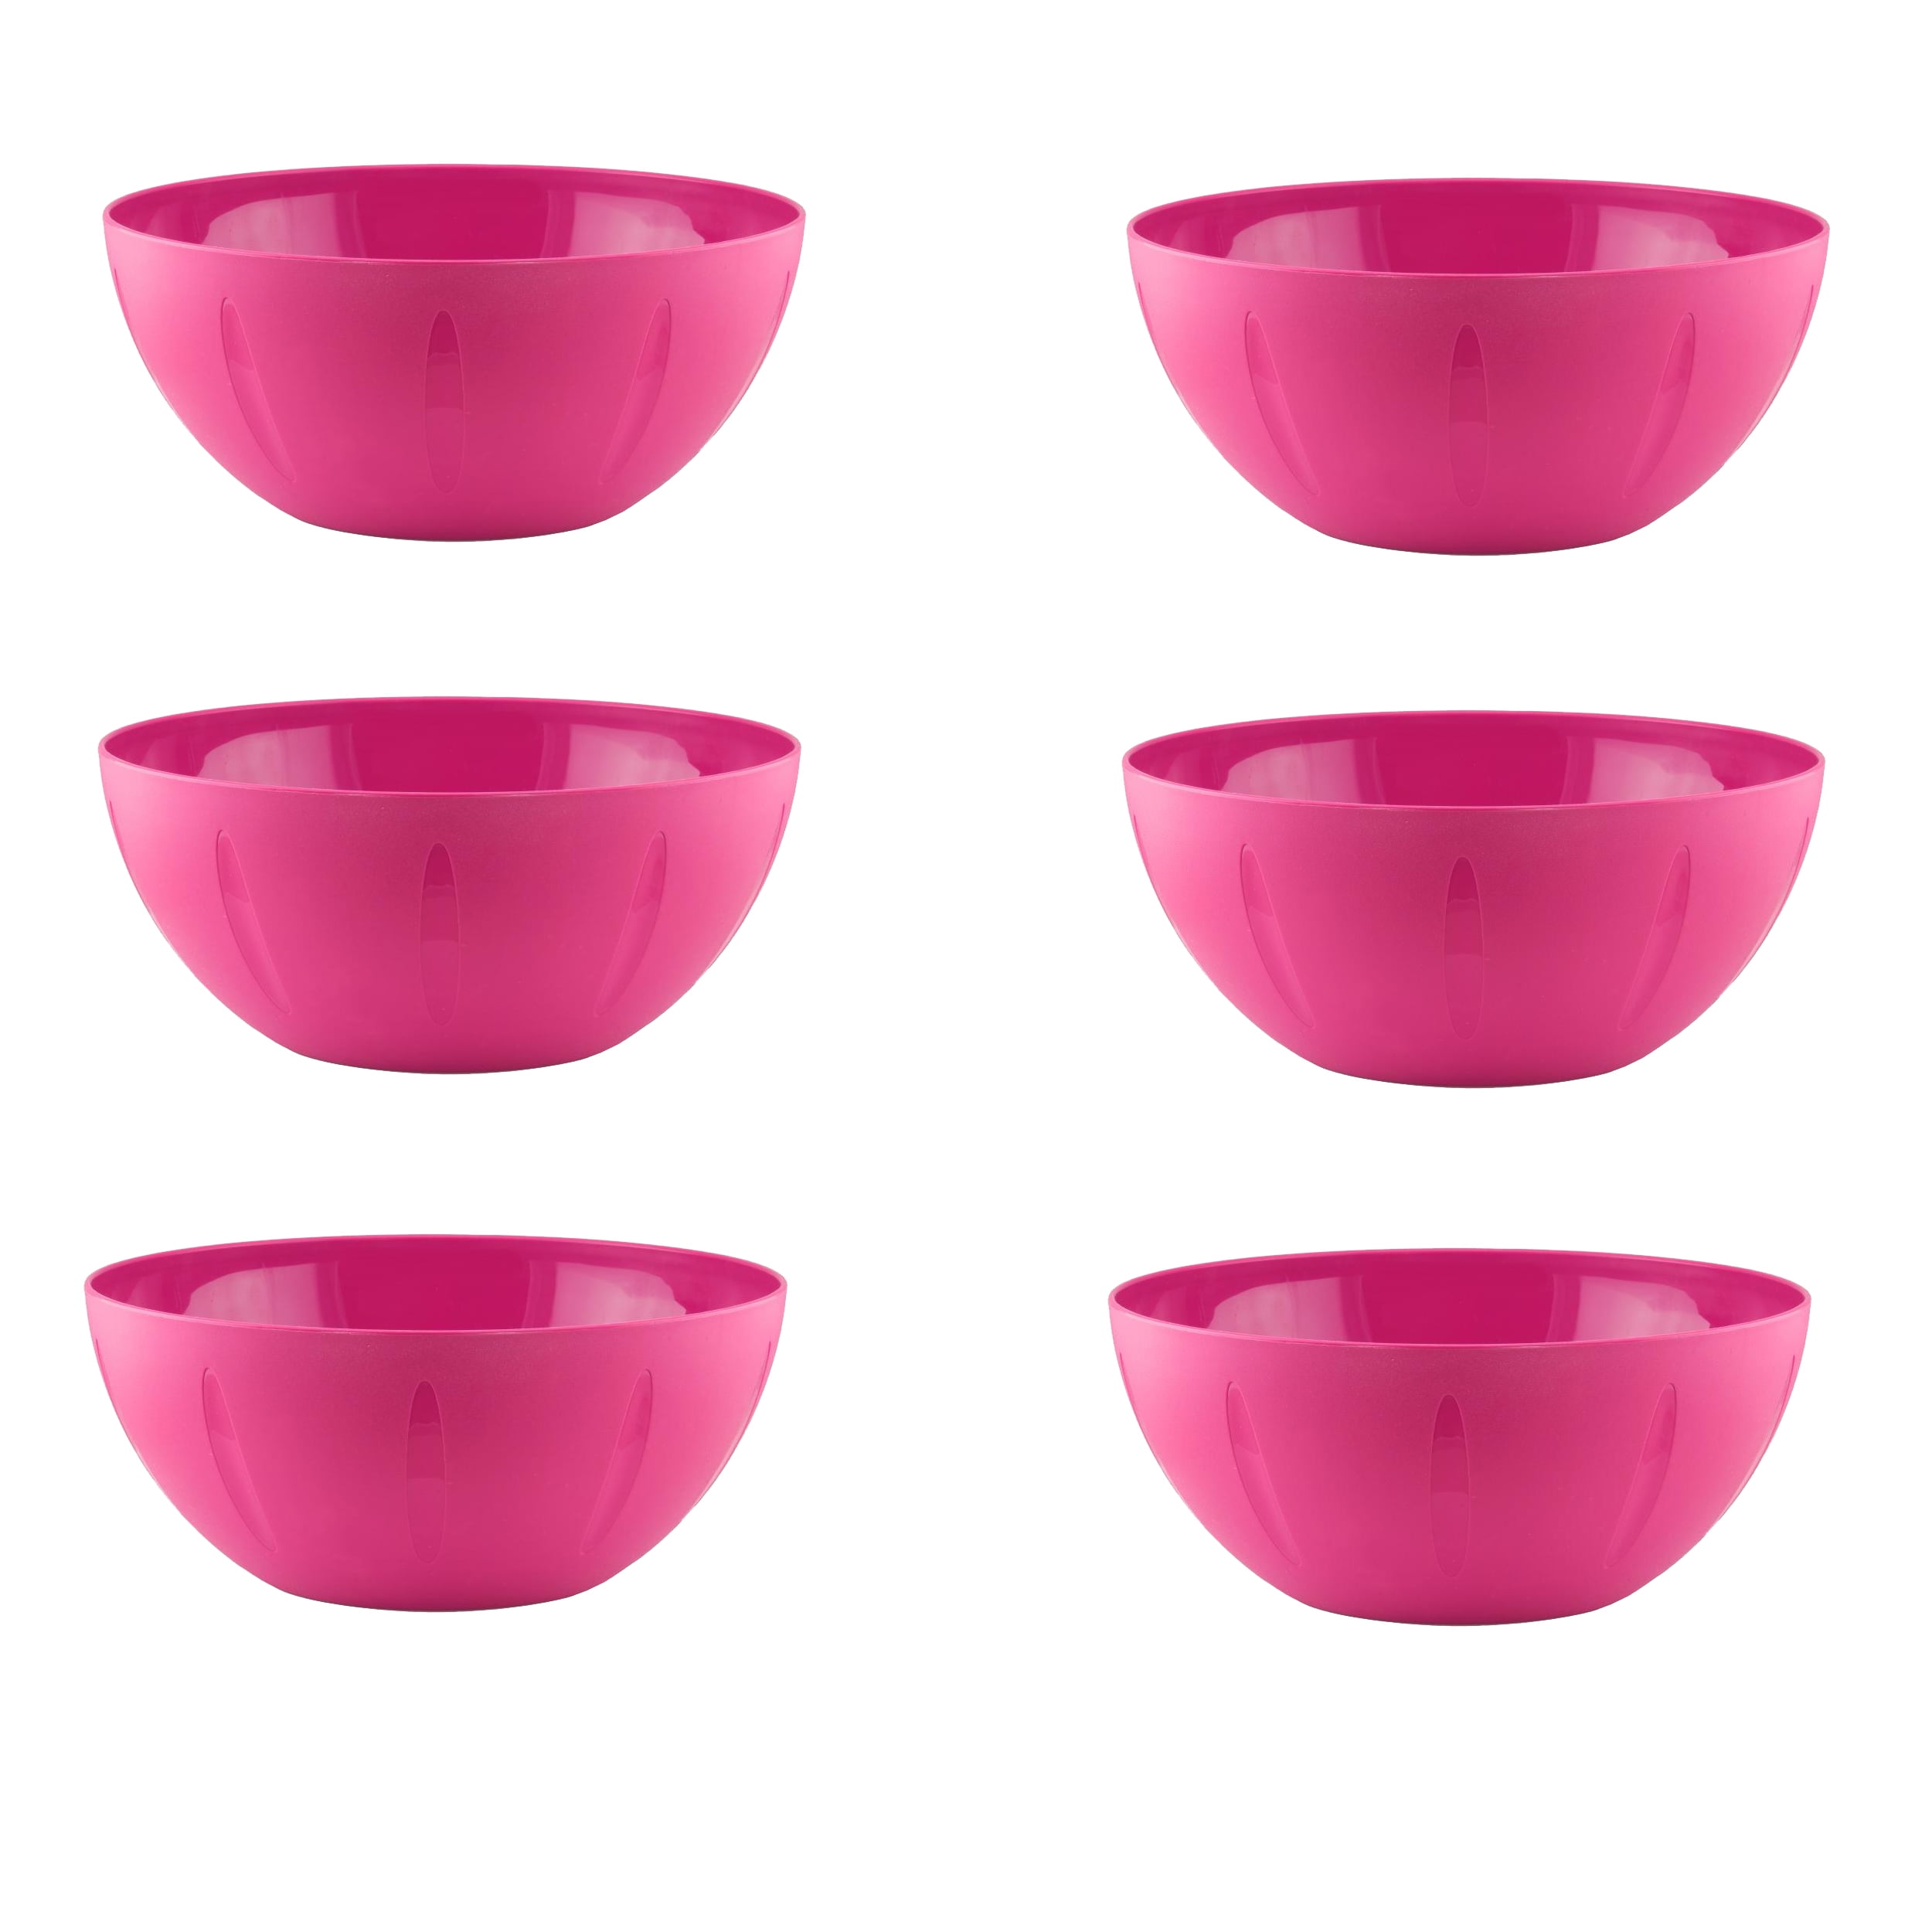 YBM HOME 8-Inch Plastic Serve Mixing Bowl for Everyday Meals -  Ideal for Cereal, Snacks, Popcorn, Salad, and Fruits, Microwave Safe, Pink:  Serving Bowls